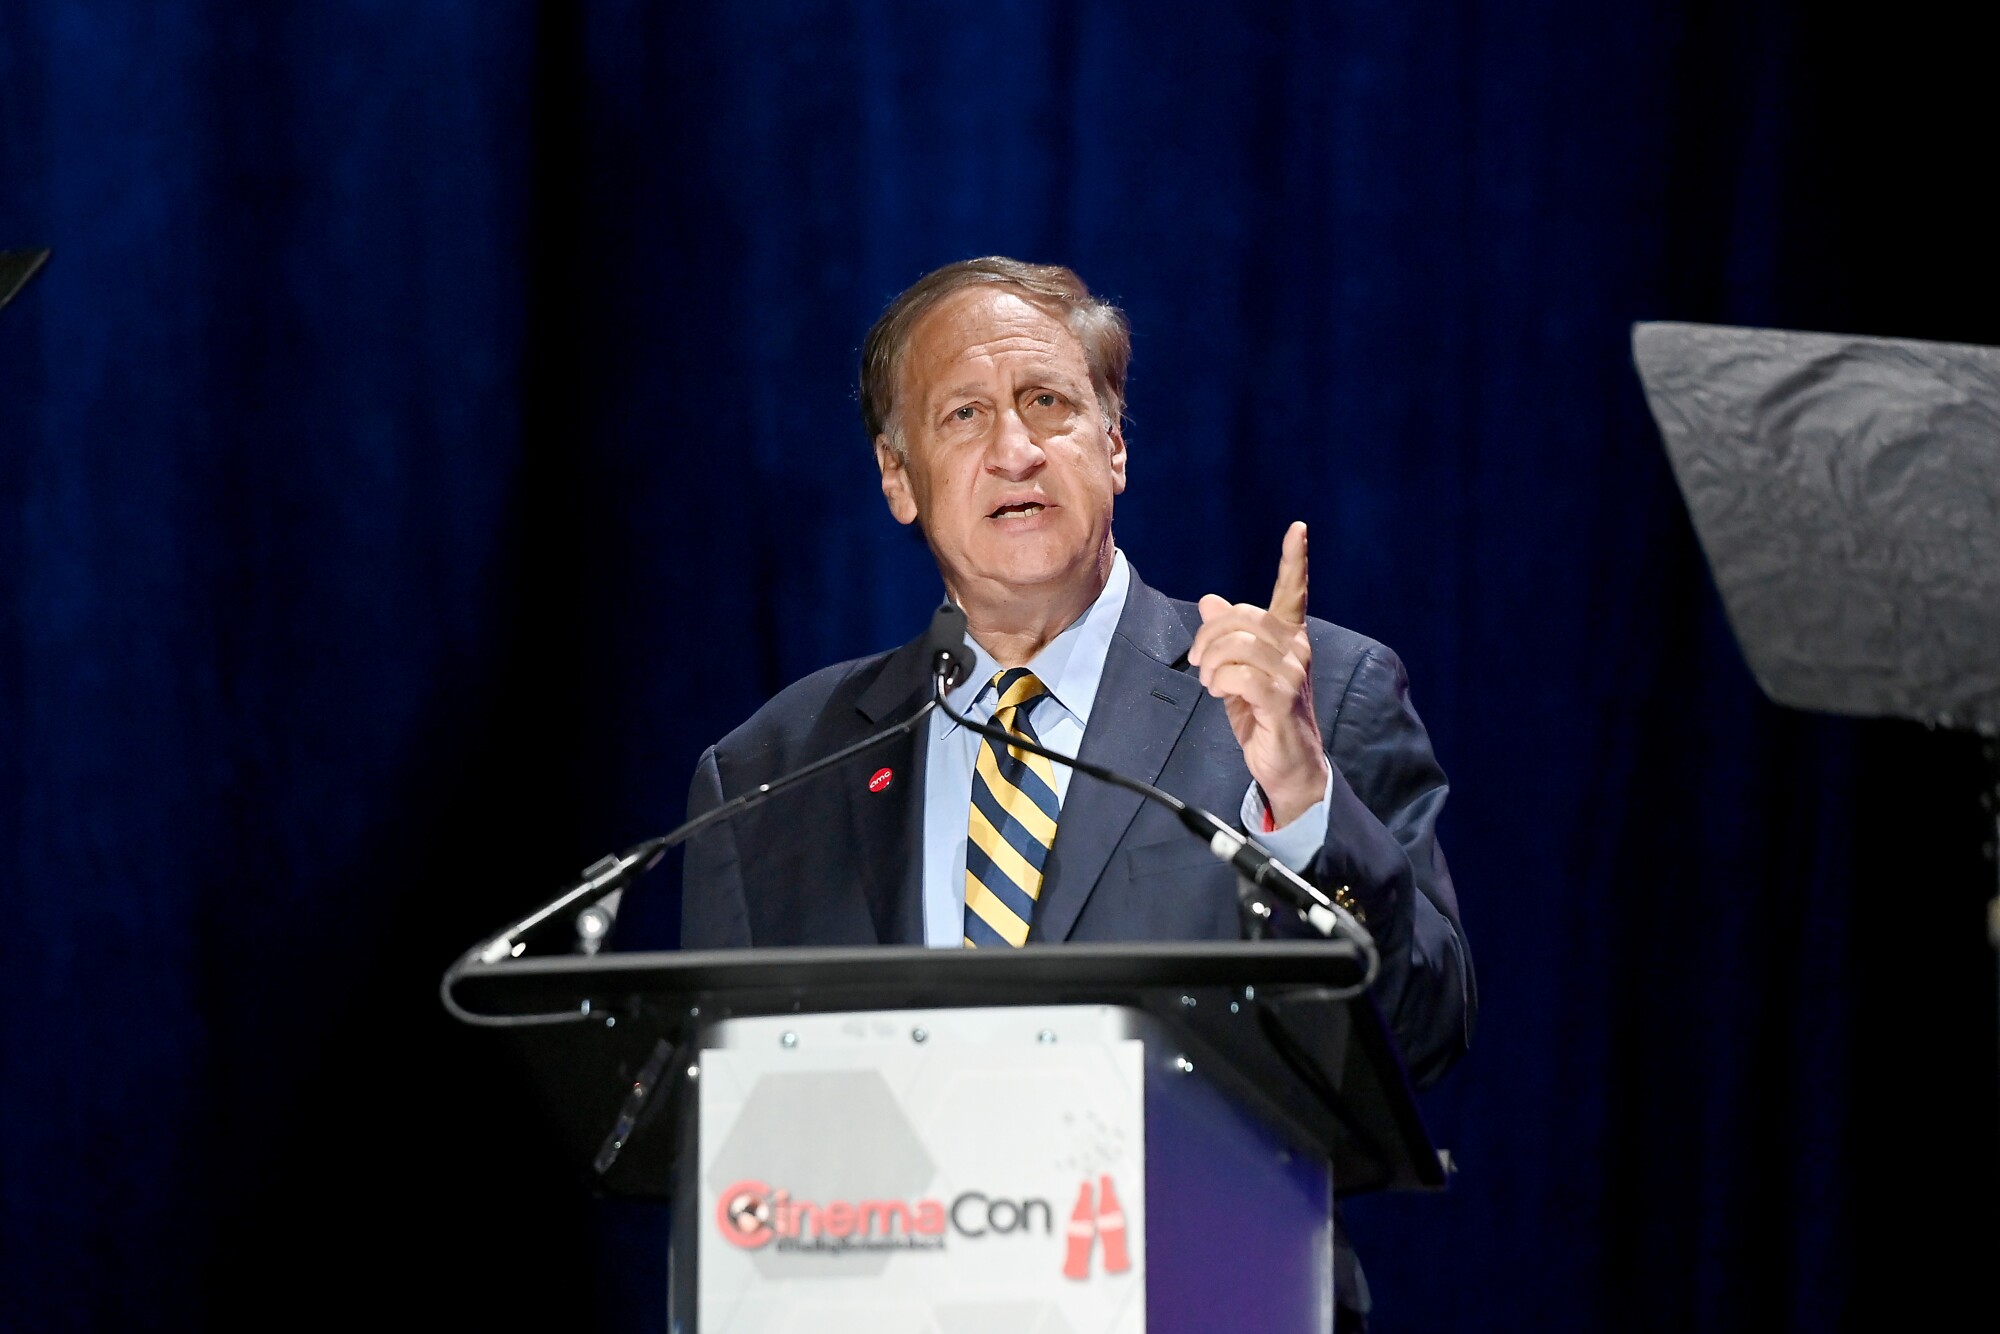 A man in a suit and tie holds up a finger as he speaks into a microphone at a podium onstage.